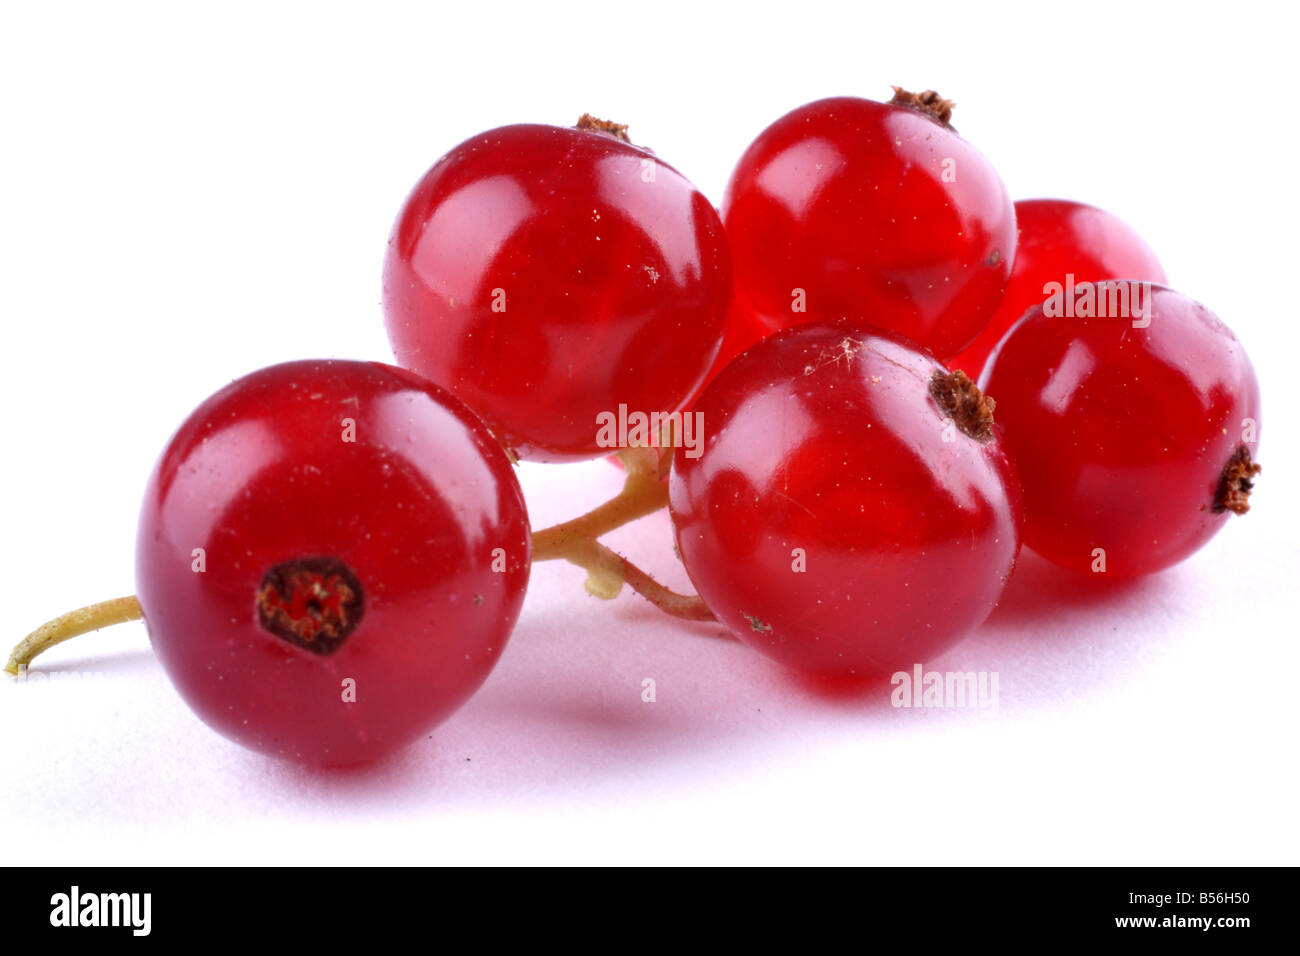 Isolated red currant Stock Photo